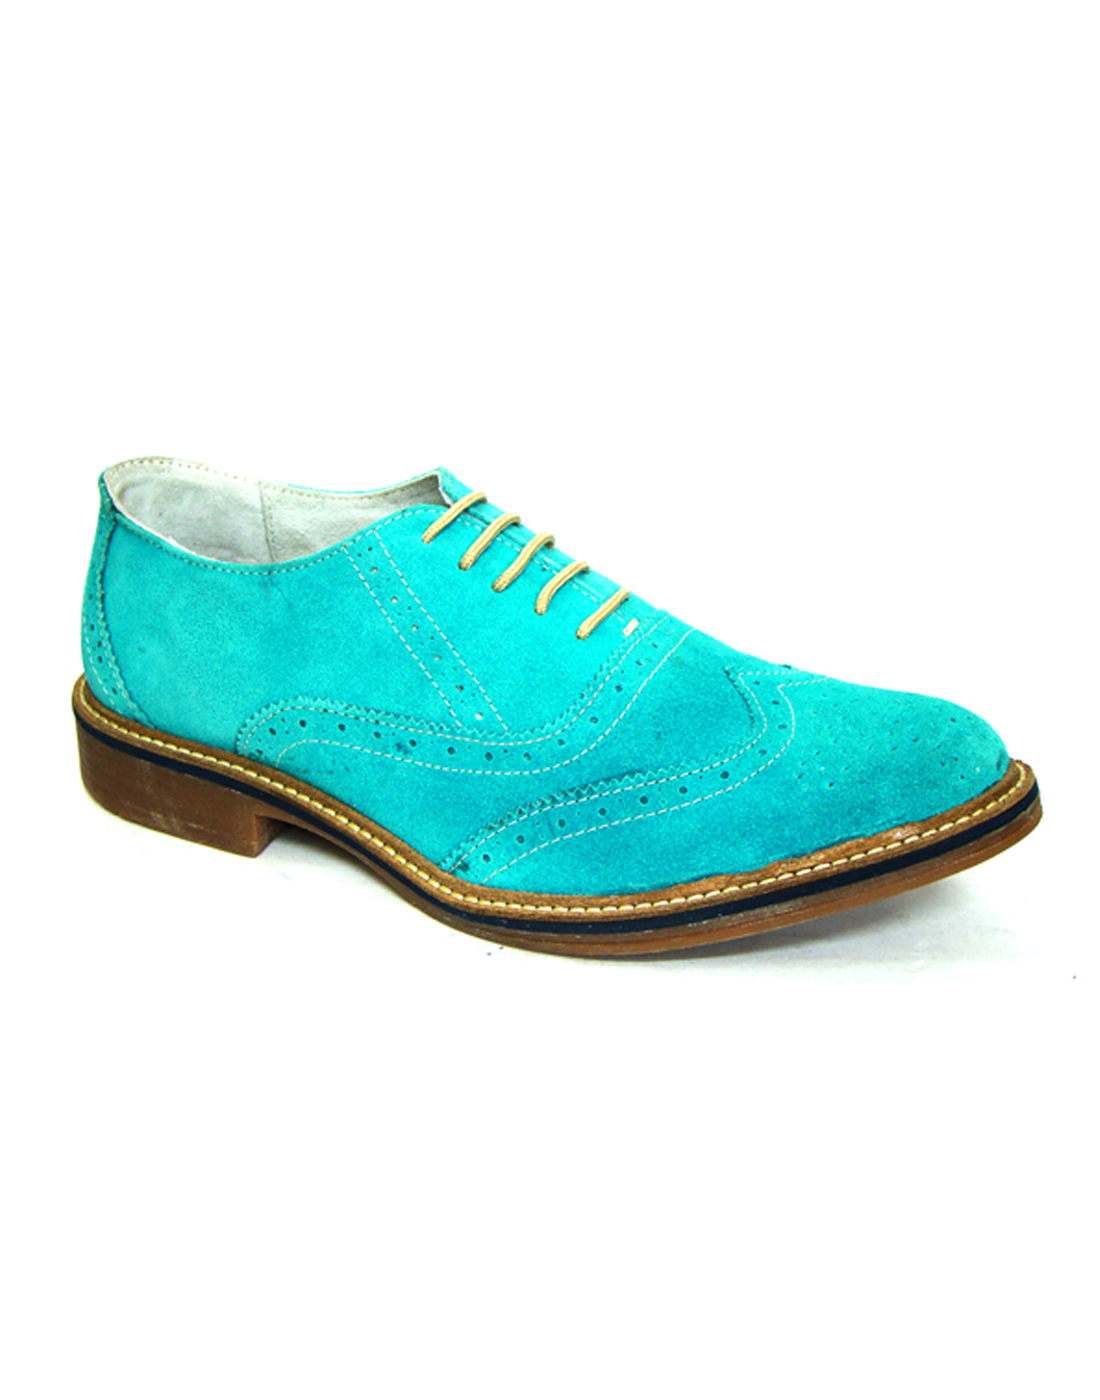 Sky Blue Color Suede Leather Brogue Shoes with Crepe Sole Size available  UKIndia 4 to 15  Article  113  Agra Shoe Mart